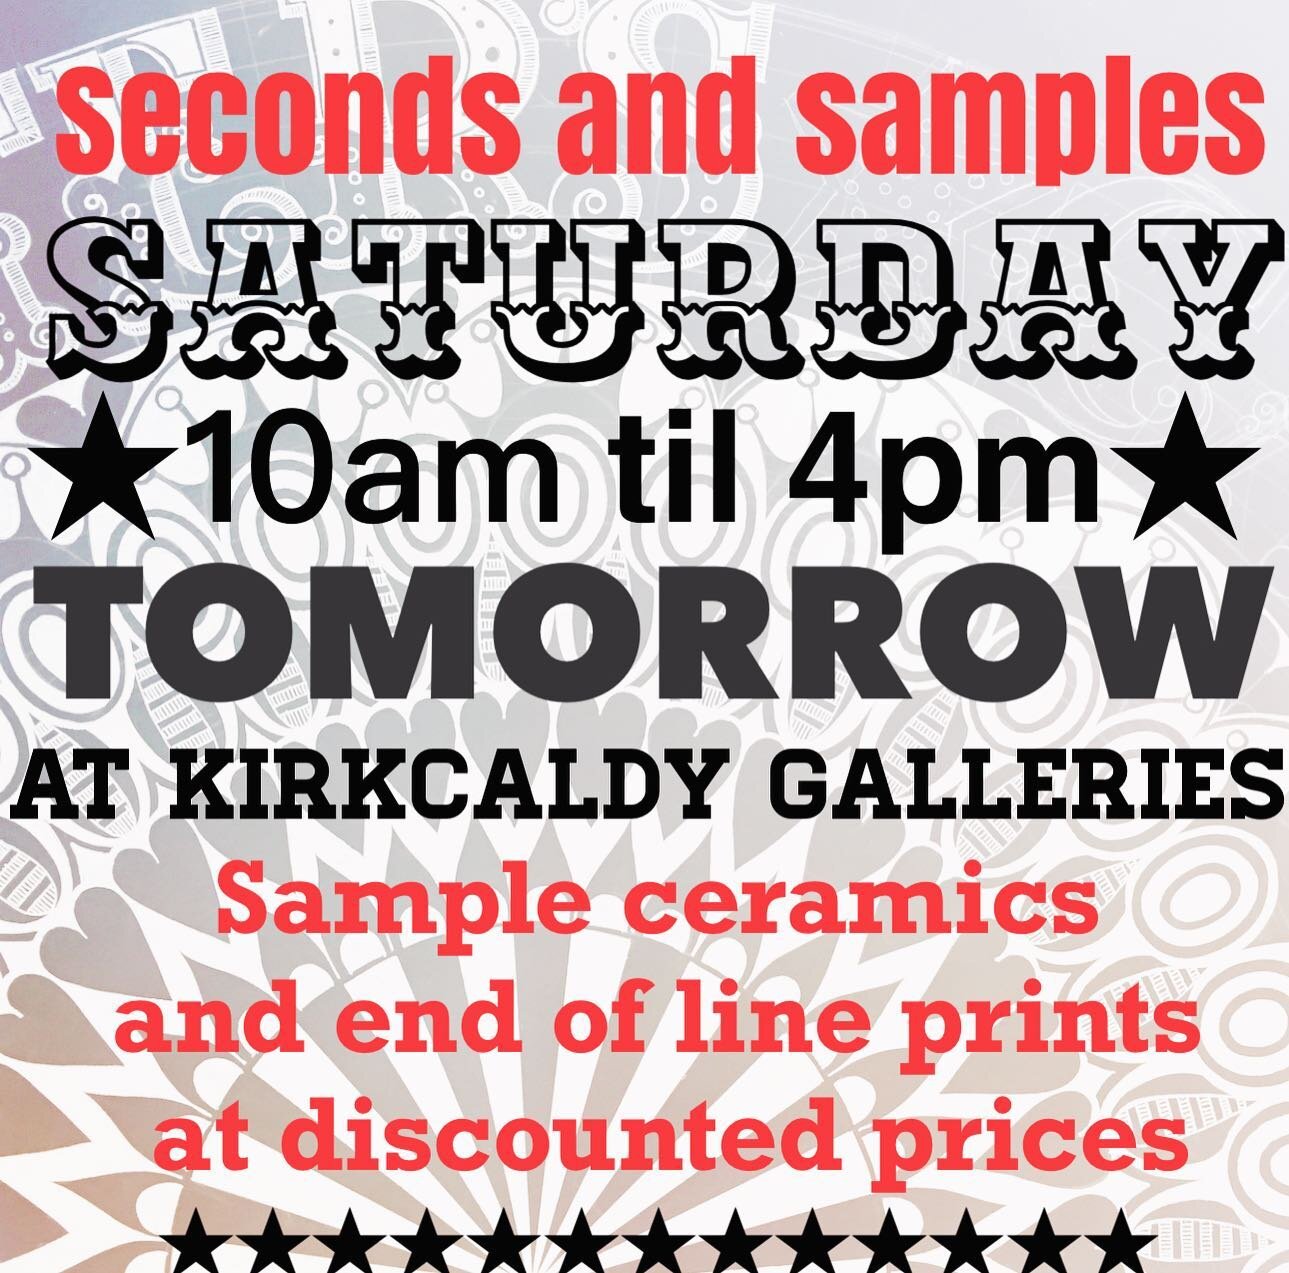 🎄💫We are bring lots of extra bits and pieces in tomorrow from backs of shelves and print drawers👏🏼 @kirkcaldy_galleries 
#limitededitionprints #sampleceramics #endoflineprints #greatprices 
⭐️⭐️⭐️⭐️⭐️⭐️⭐️⭐️⭐️⭐️⭐️⭐️